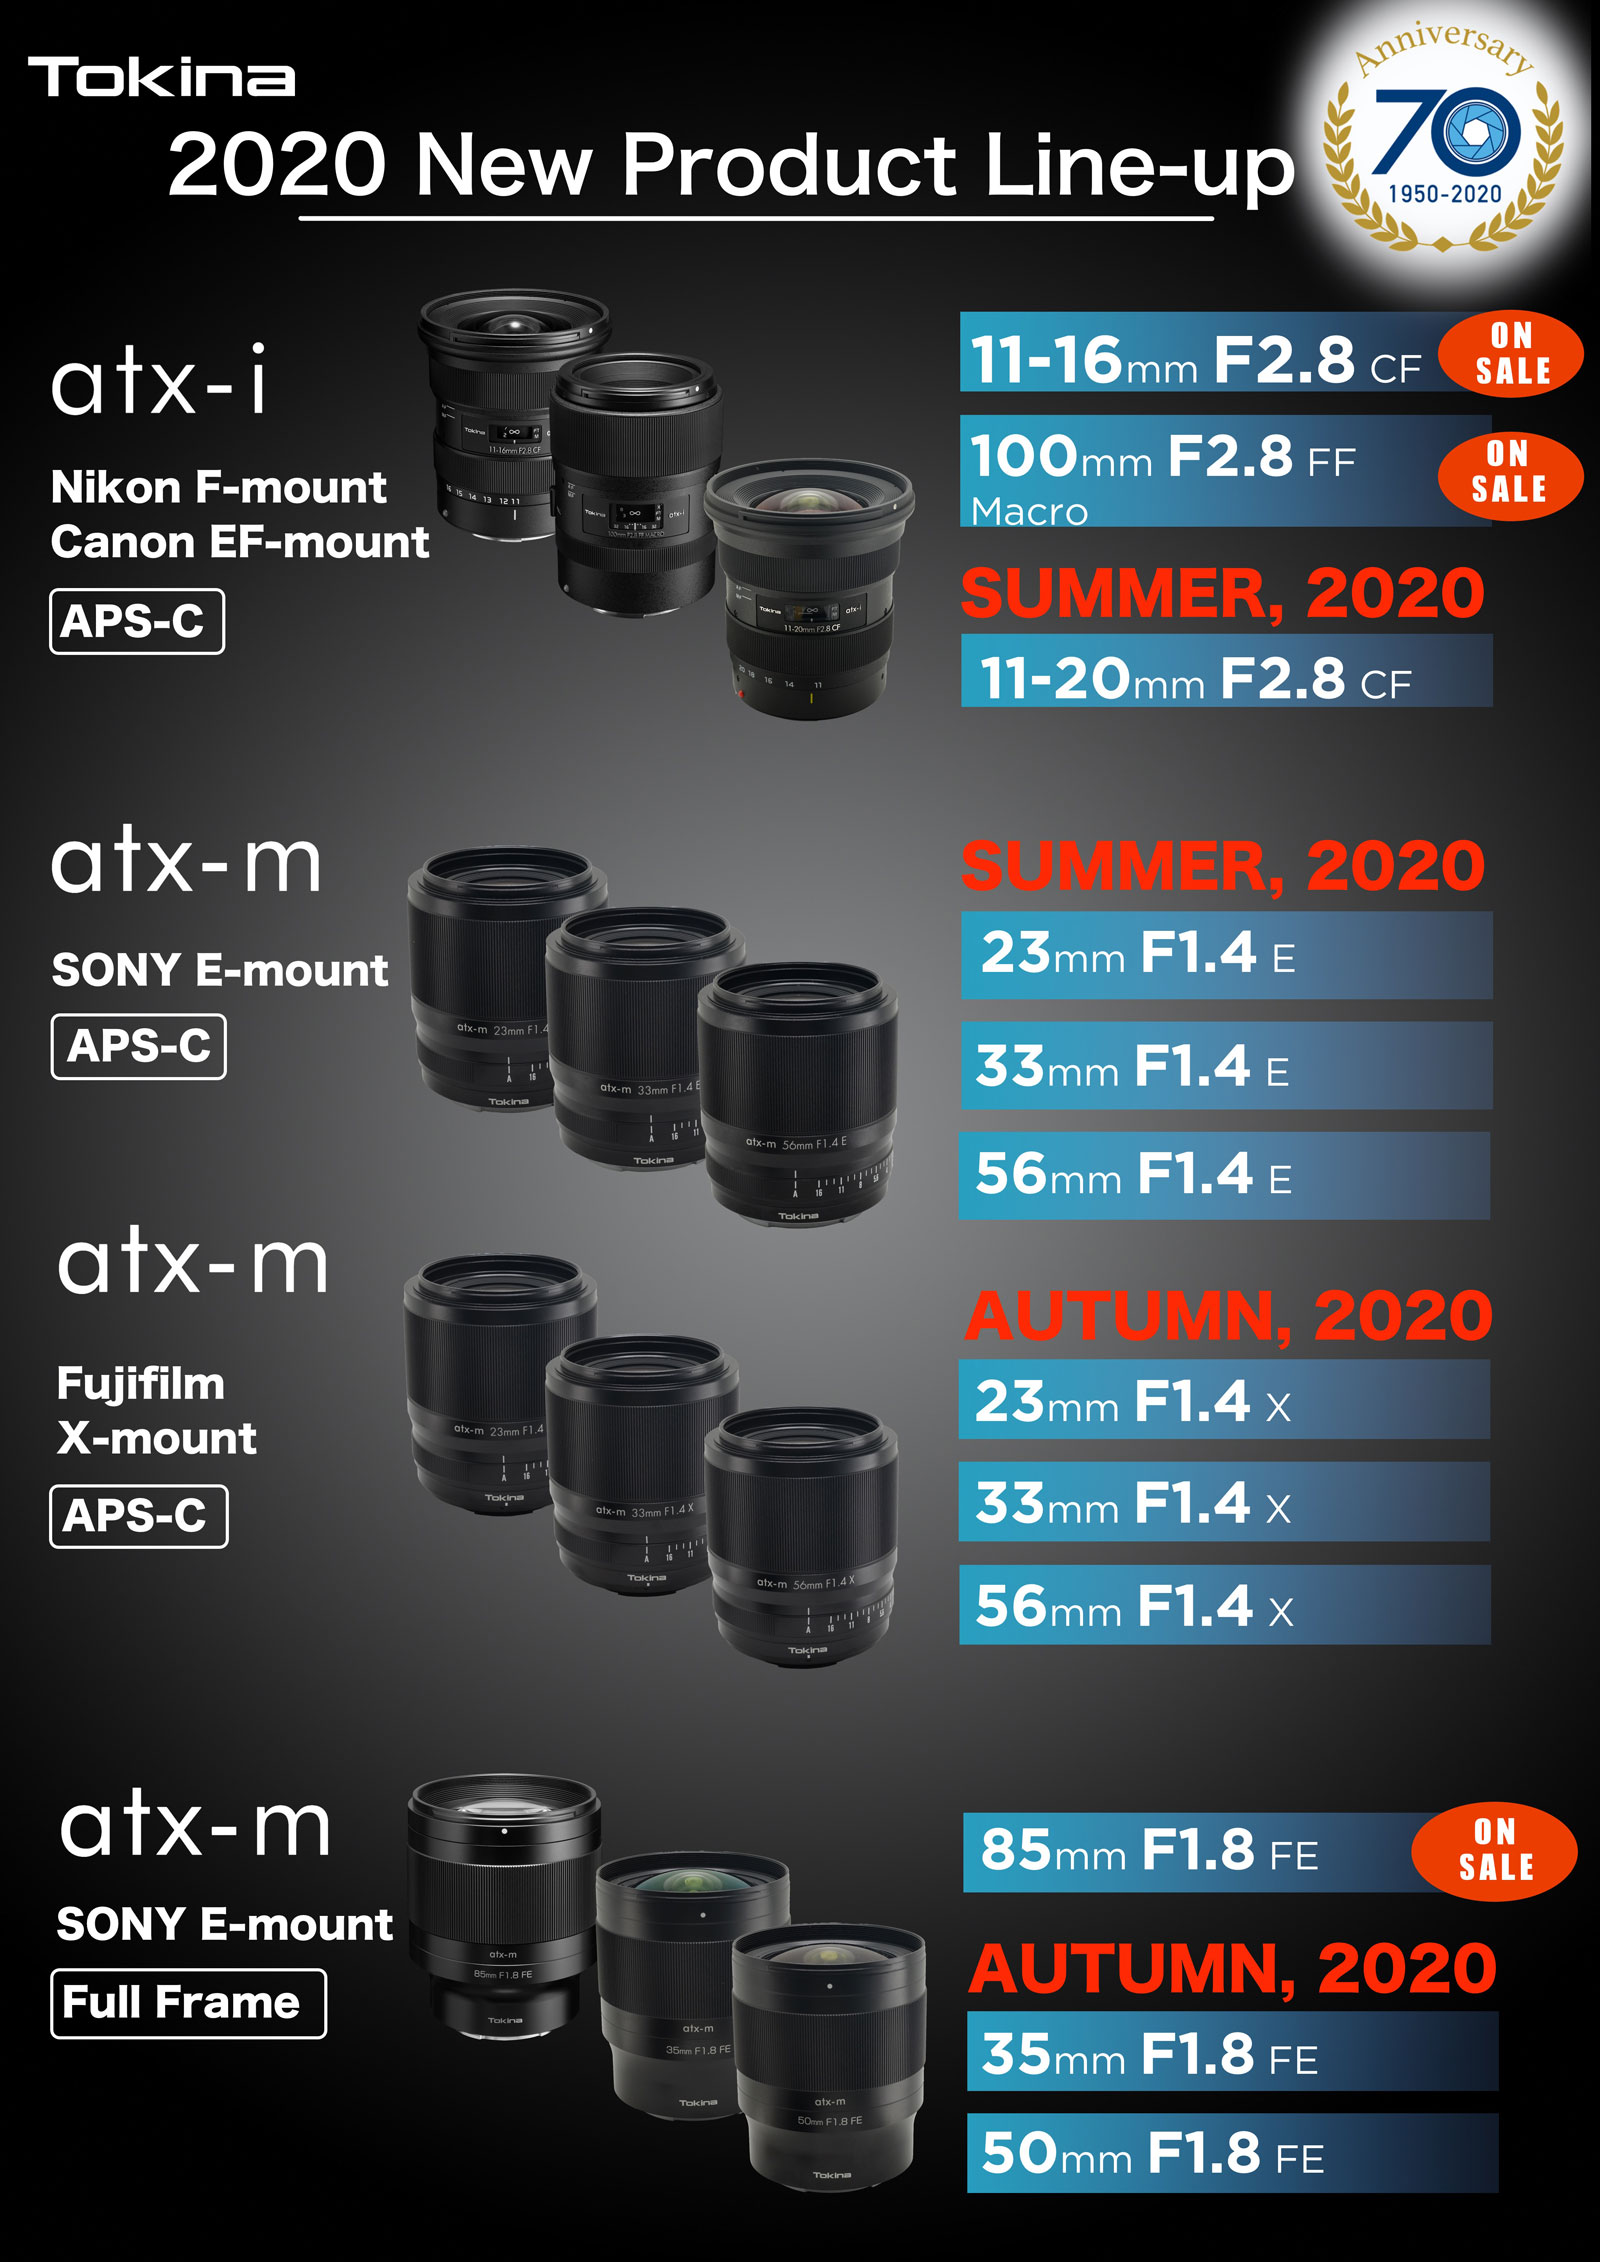 Tokina Lens Line Up New Mirrorless Lenses For Sony And Fuji Plus A New Dslr Lens For Nikon And Canon Photo Rumors